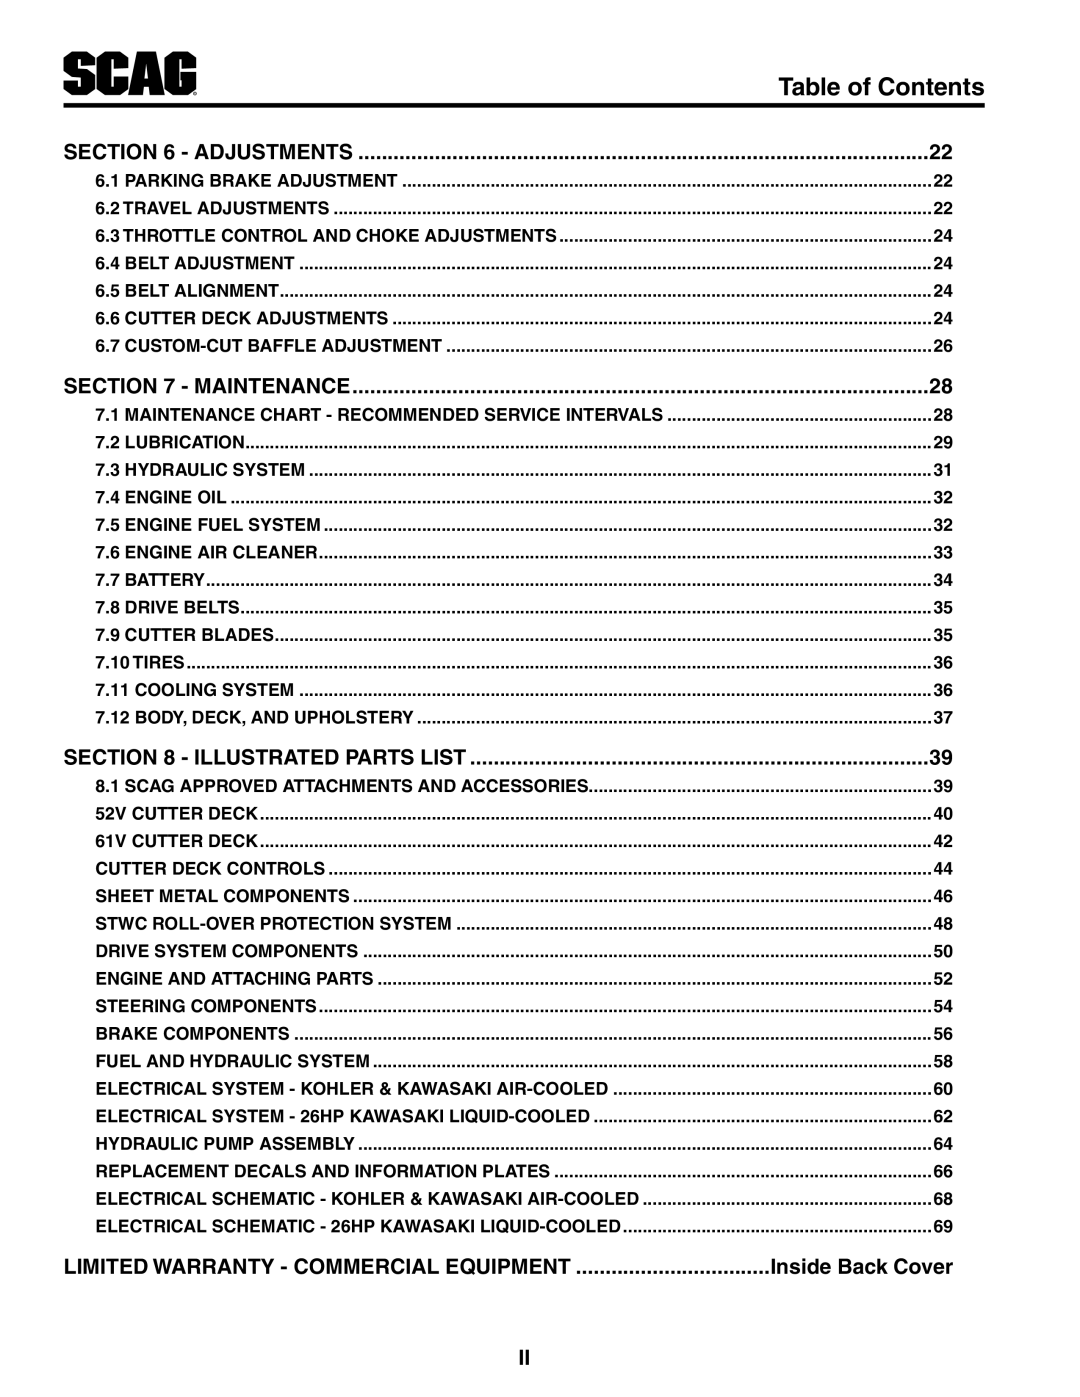 Scag Power Equipment STWC61V-25KA-LC manual Table of Contents, Limited Warranty - Commercial Equipment, Inside Back Cover 